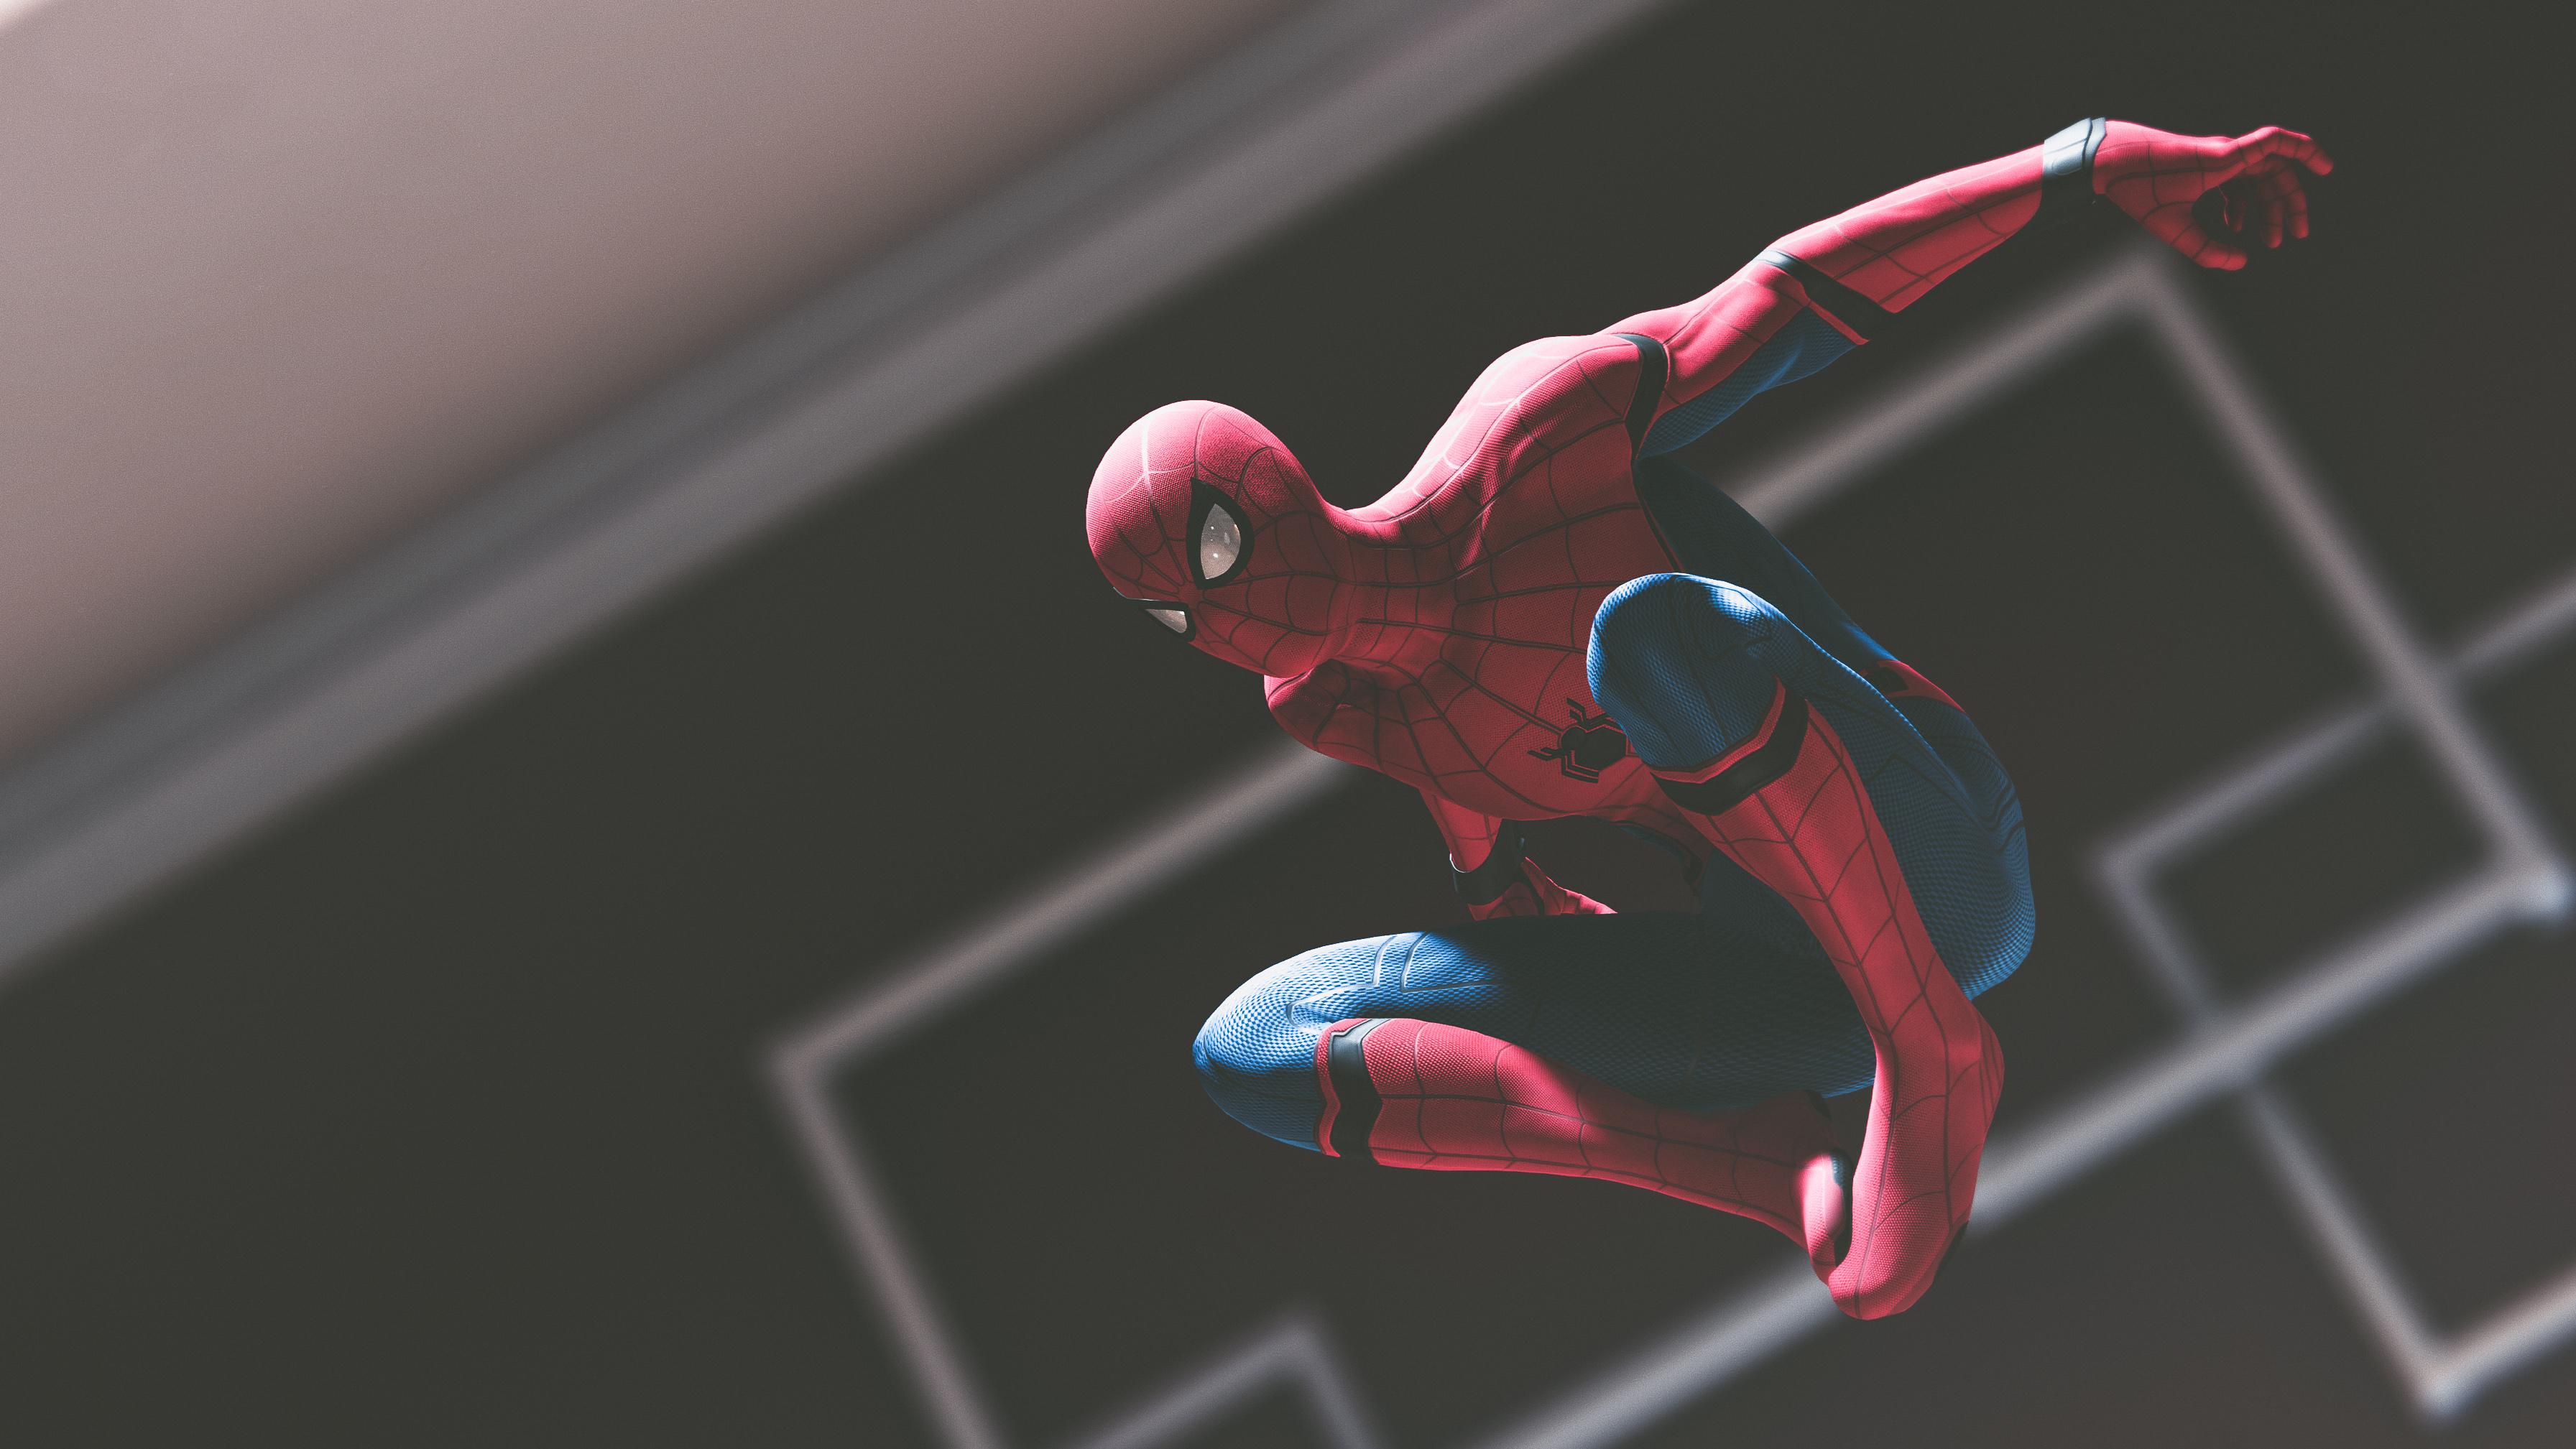  spiderman  wallpapers  4k  for your phone and desktop screen